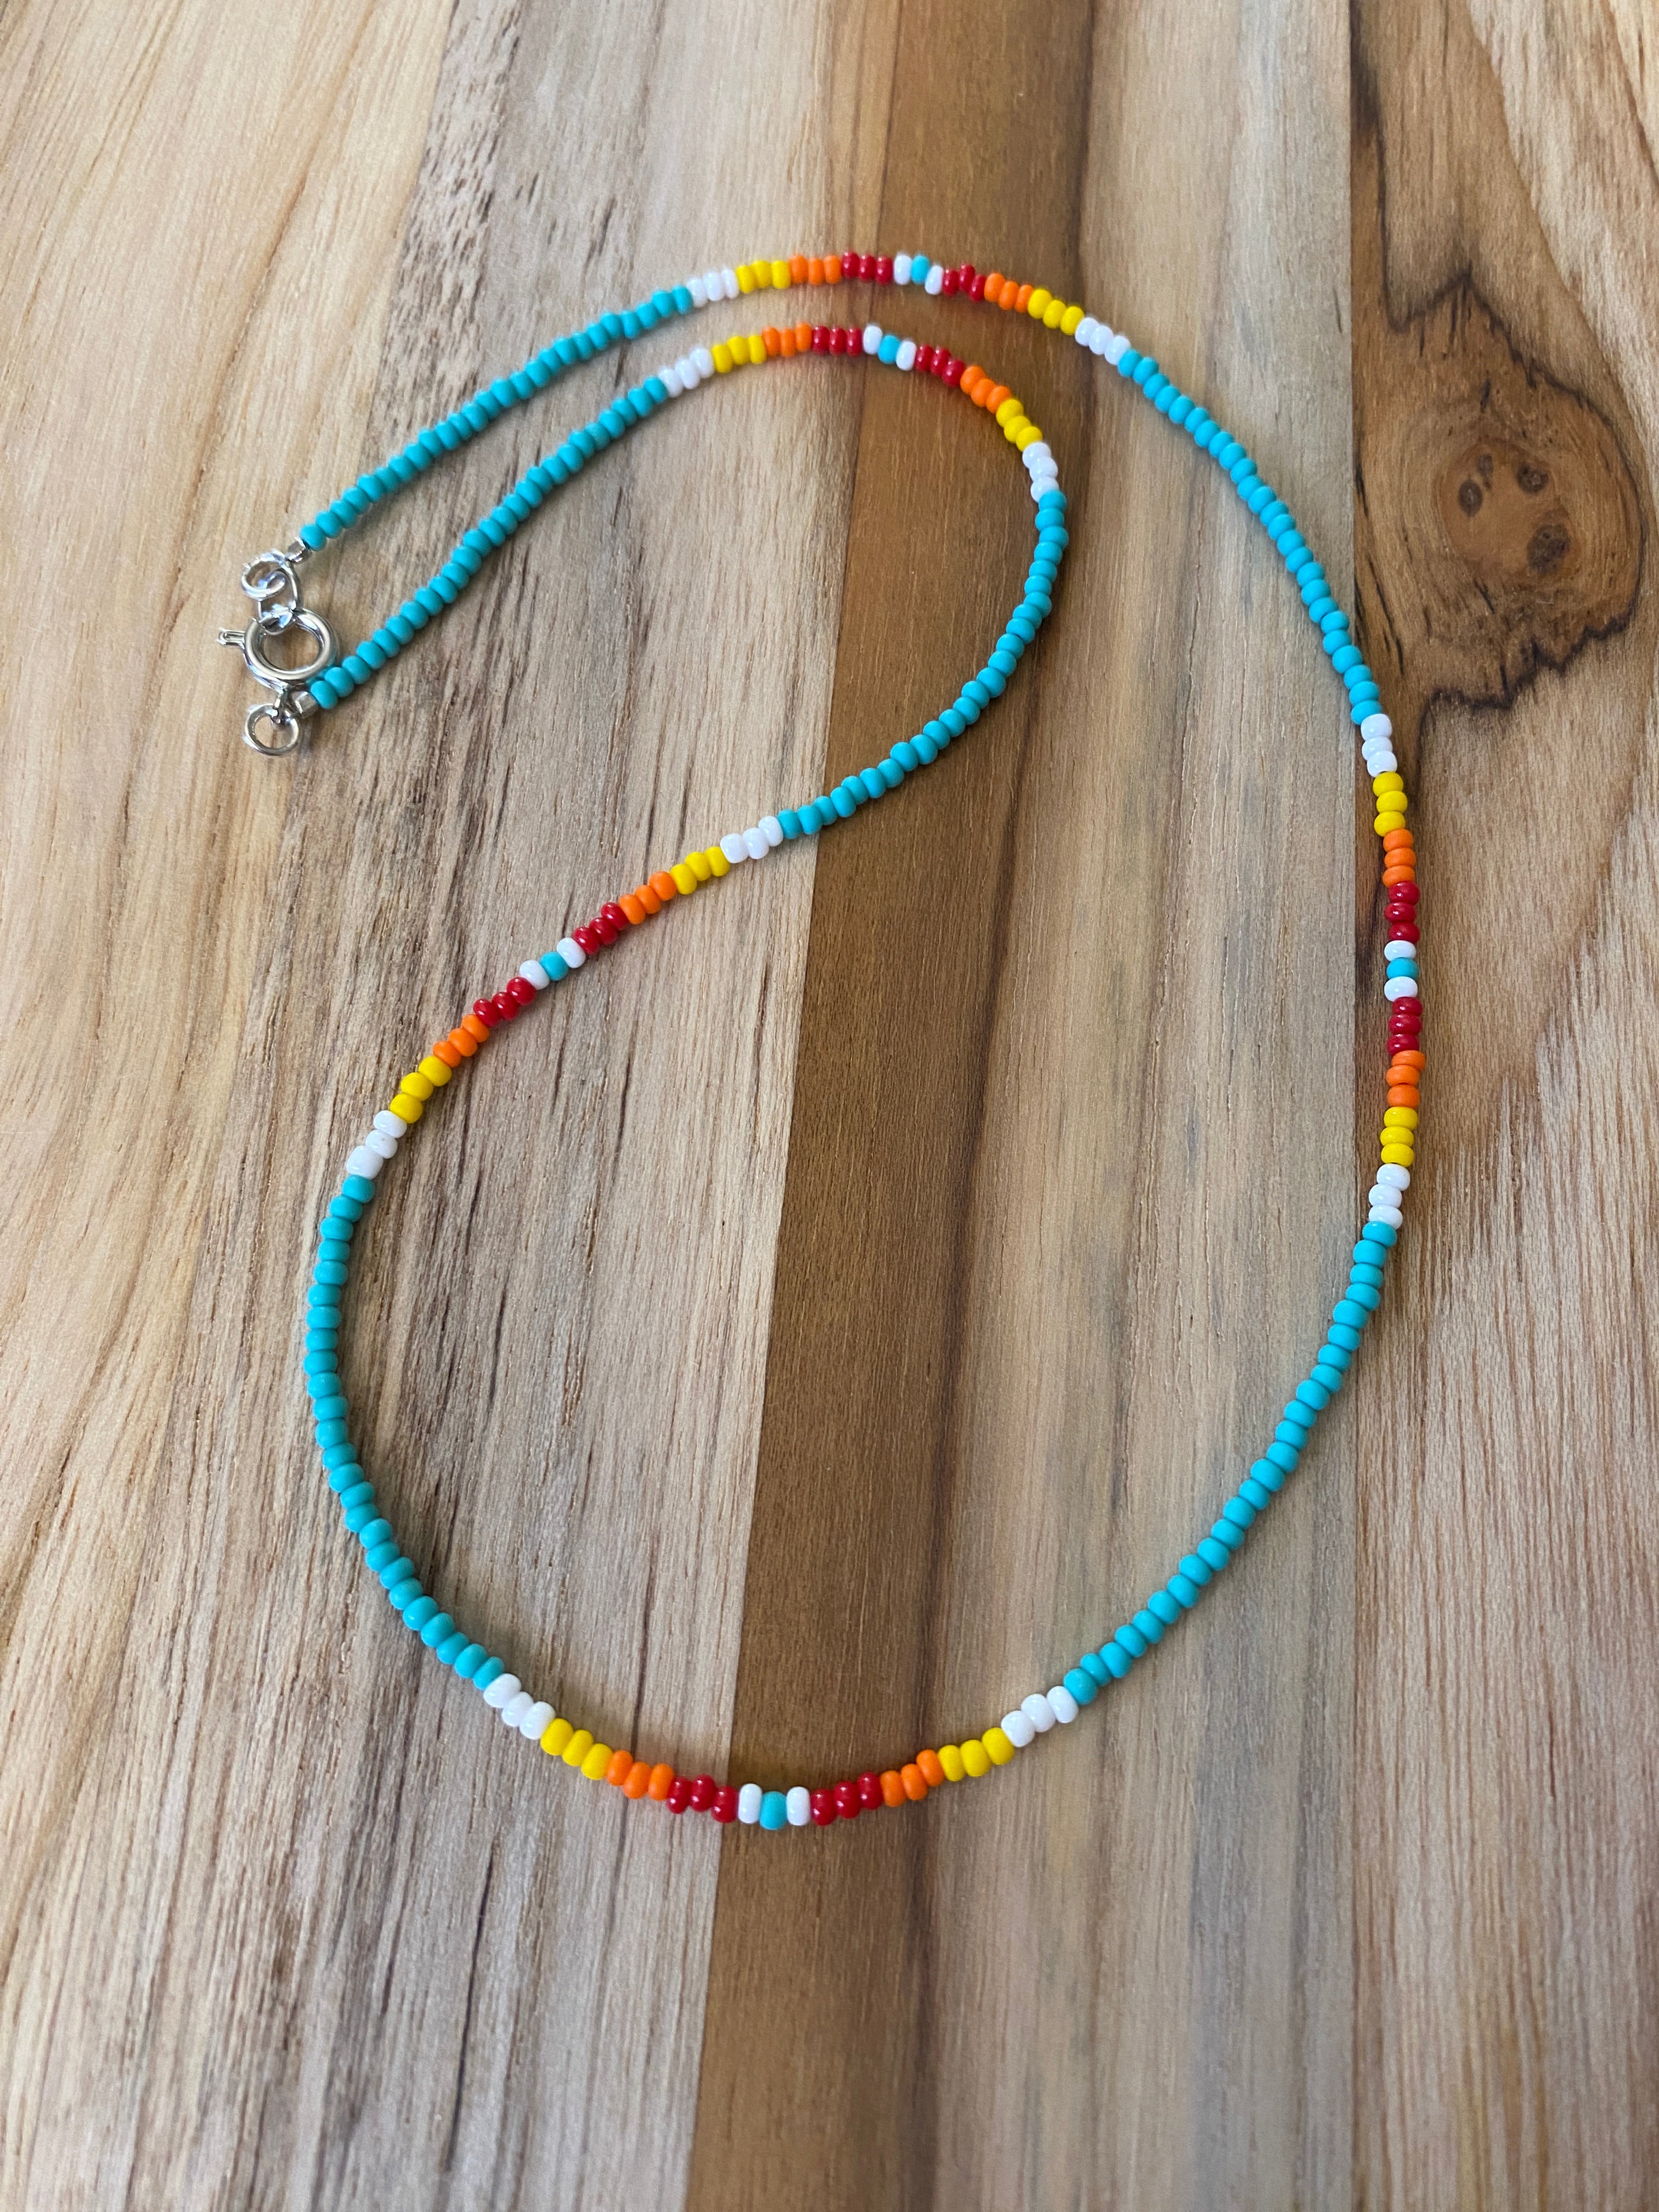 Rainbow Seed Bead Necklace. Rainbow Pattern & Black Seed Bead Necklace  Jewelry. Made in USA – Just Bead It